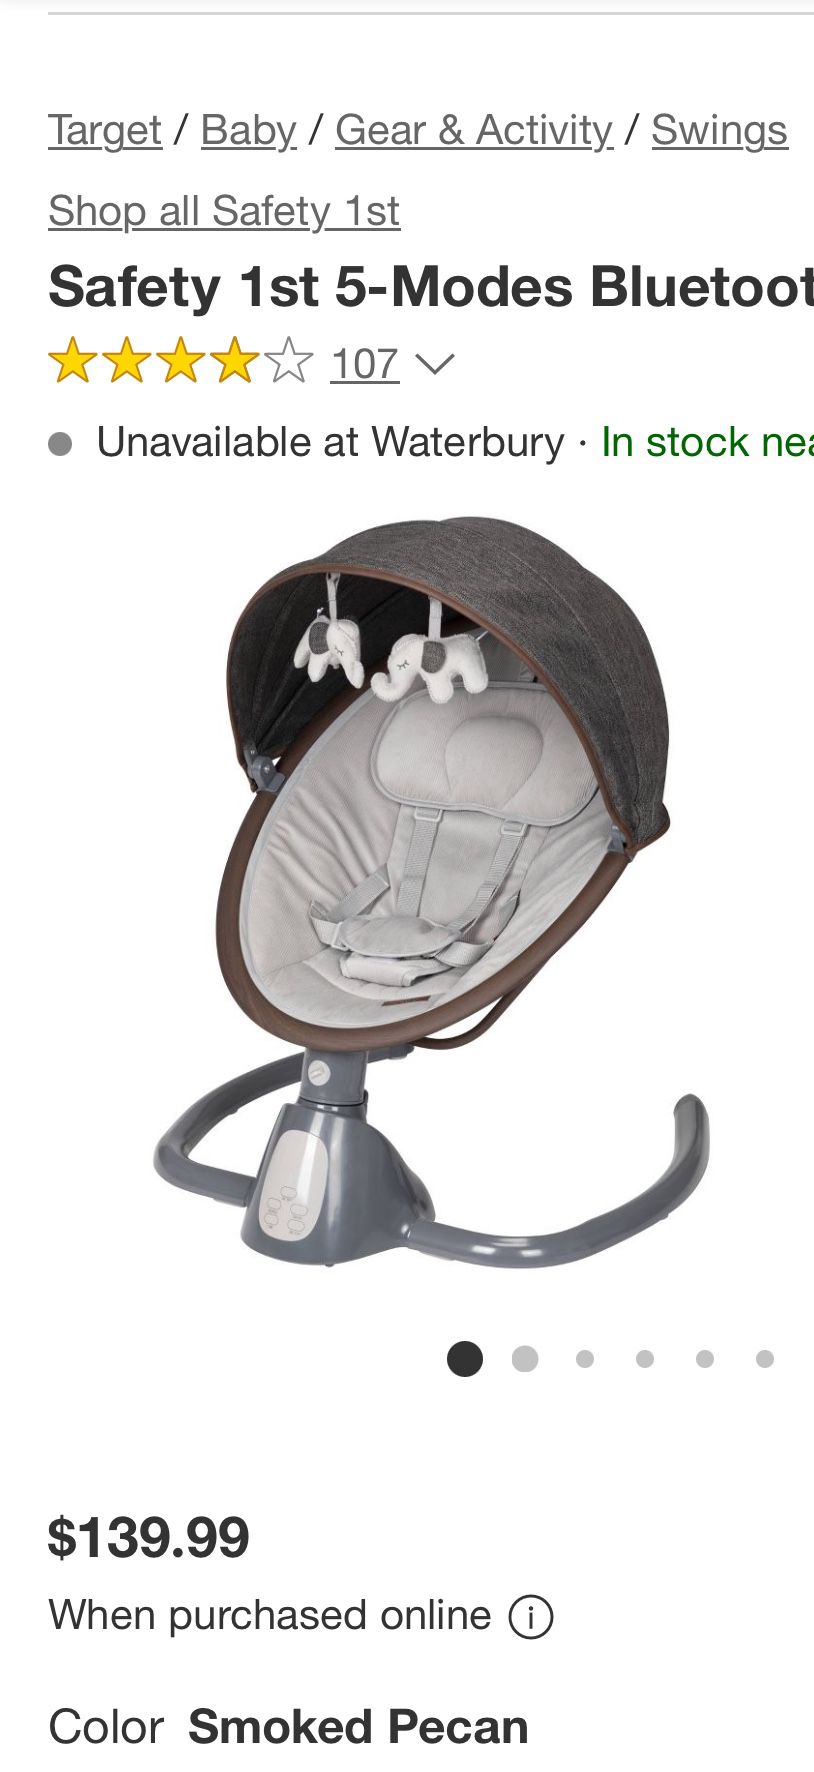 Safety 1st Bluetooth Baby Swing 